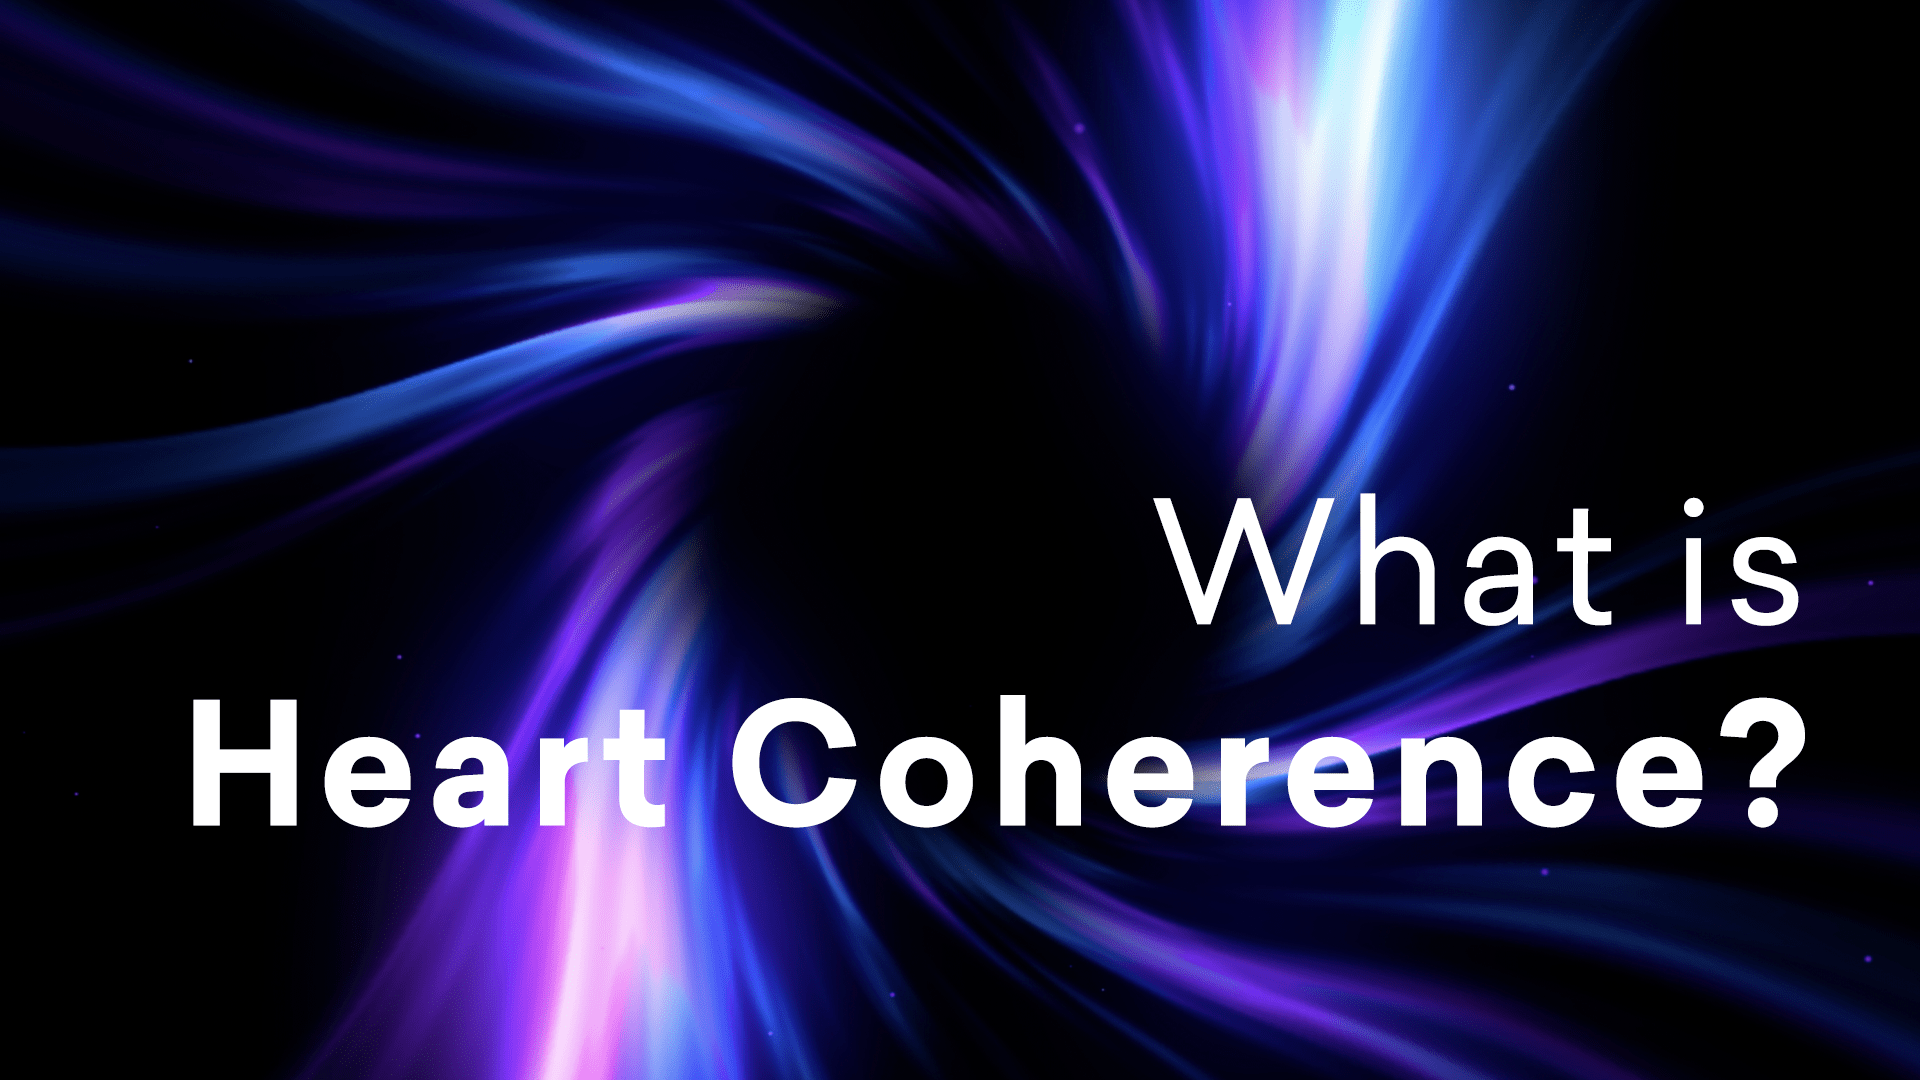 What is coherence